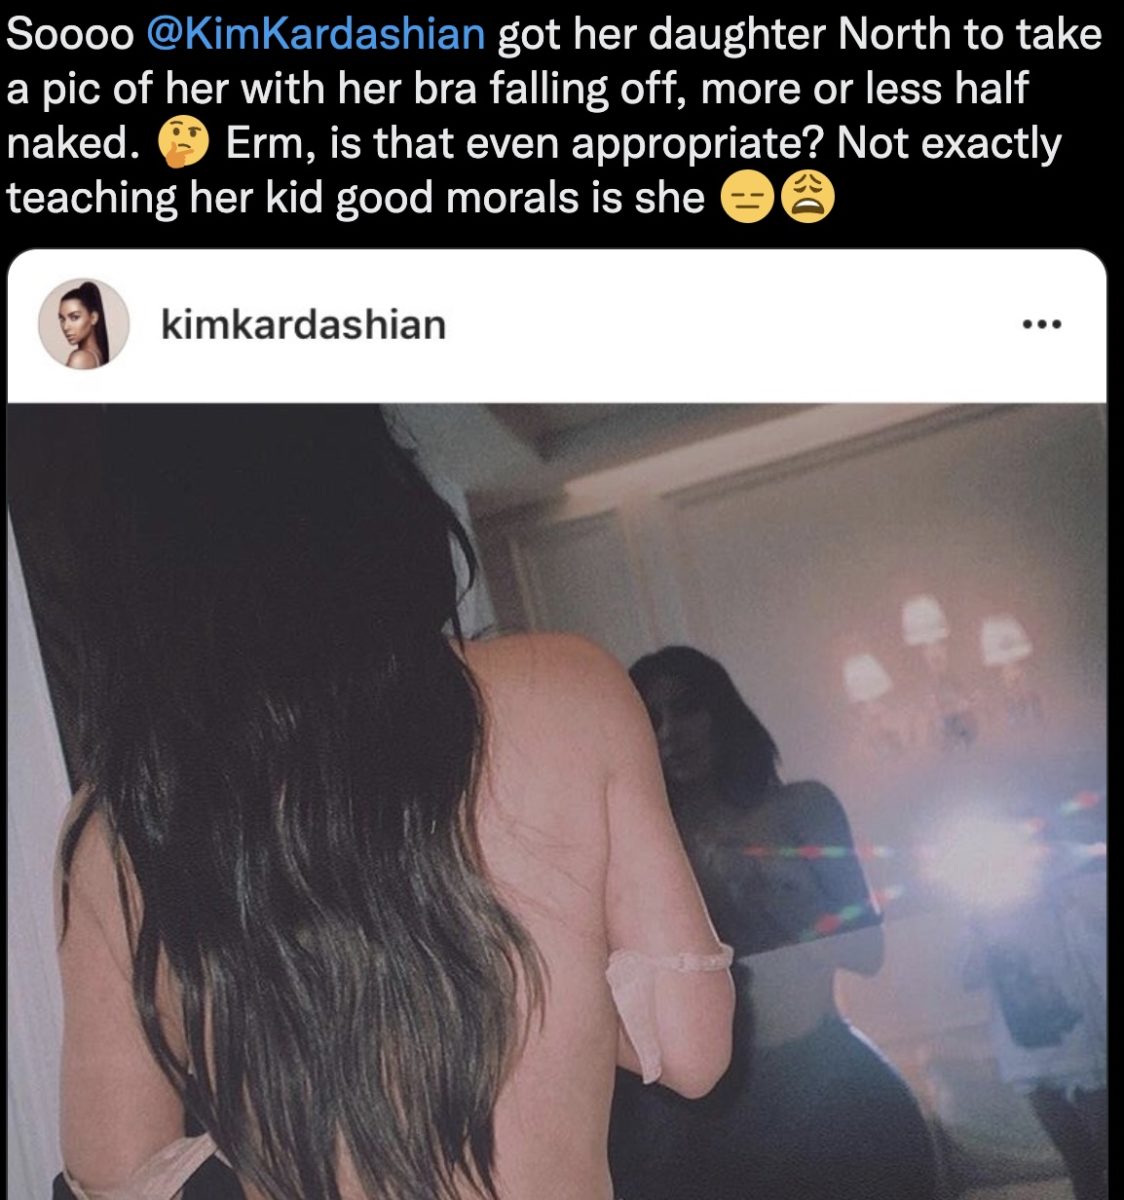 20 of the absolute craziest kardashian-jenner parenting controversies | let's take a look at some of the craziest kardashian parenting controversies from over the years. buckle up!